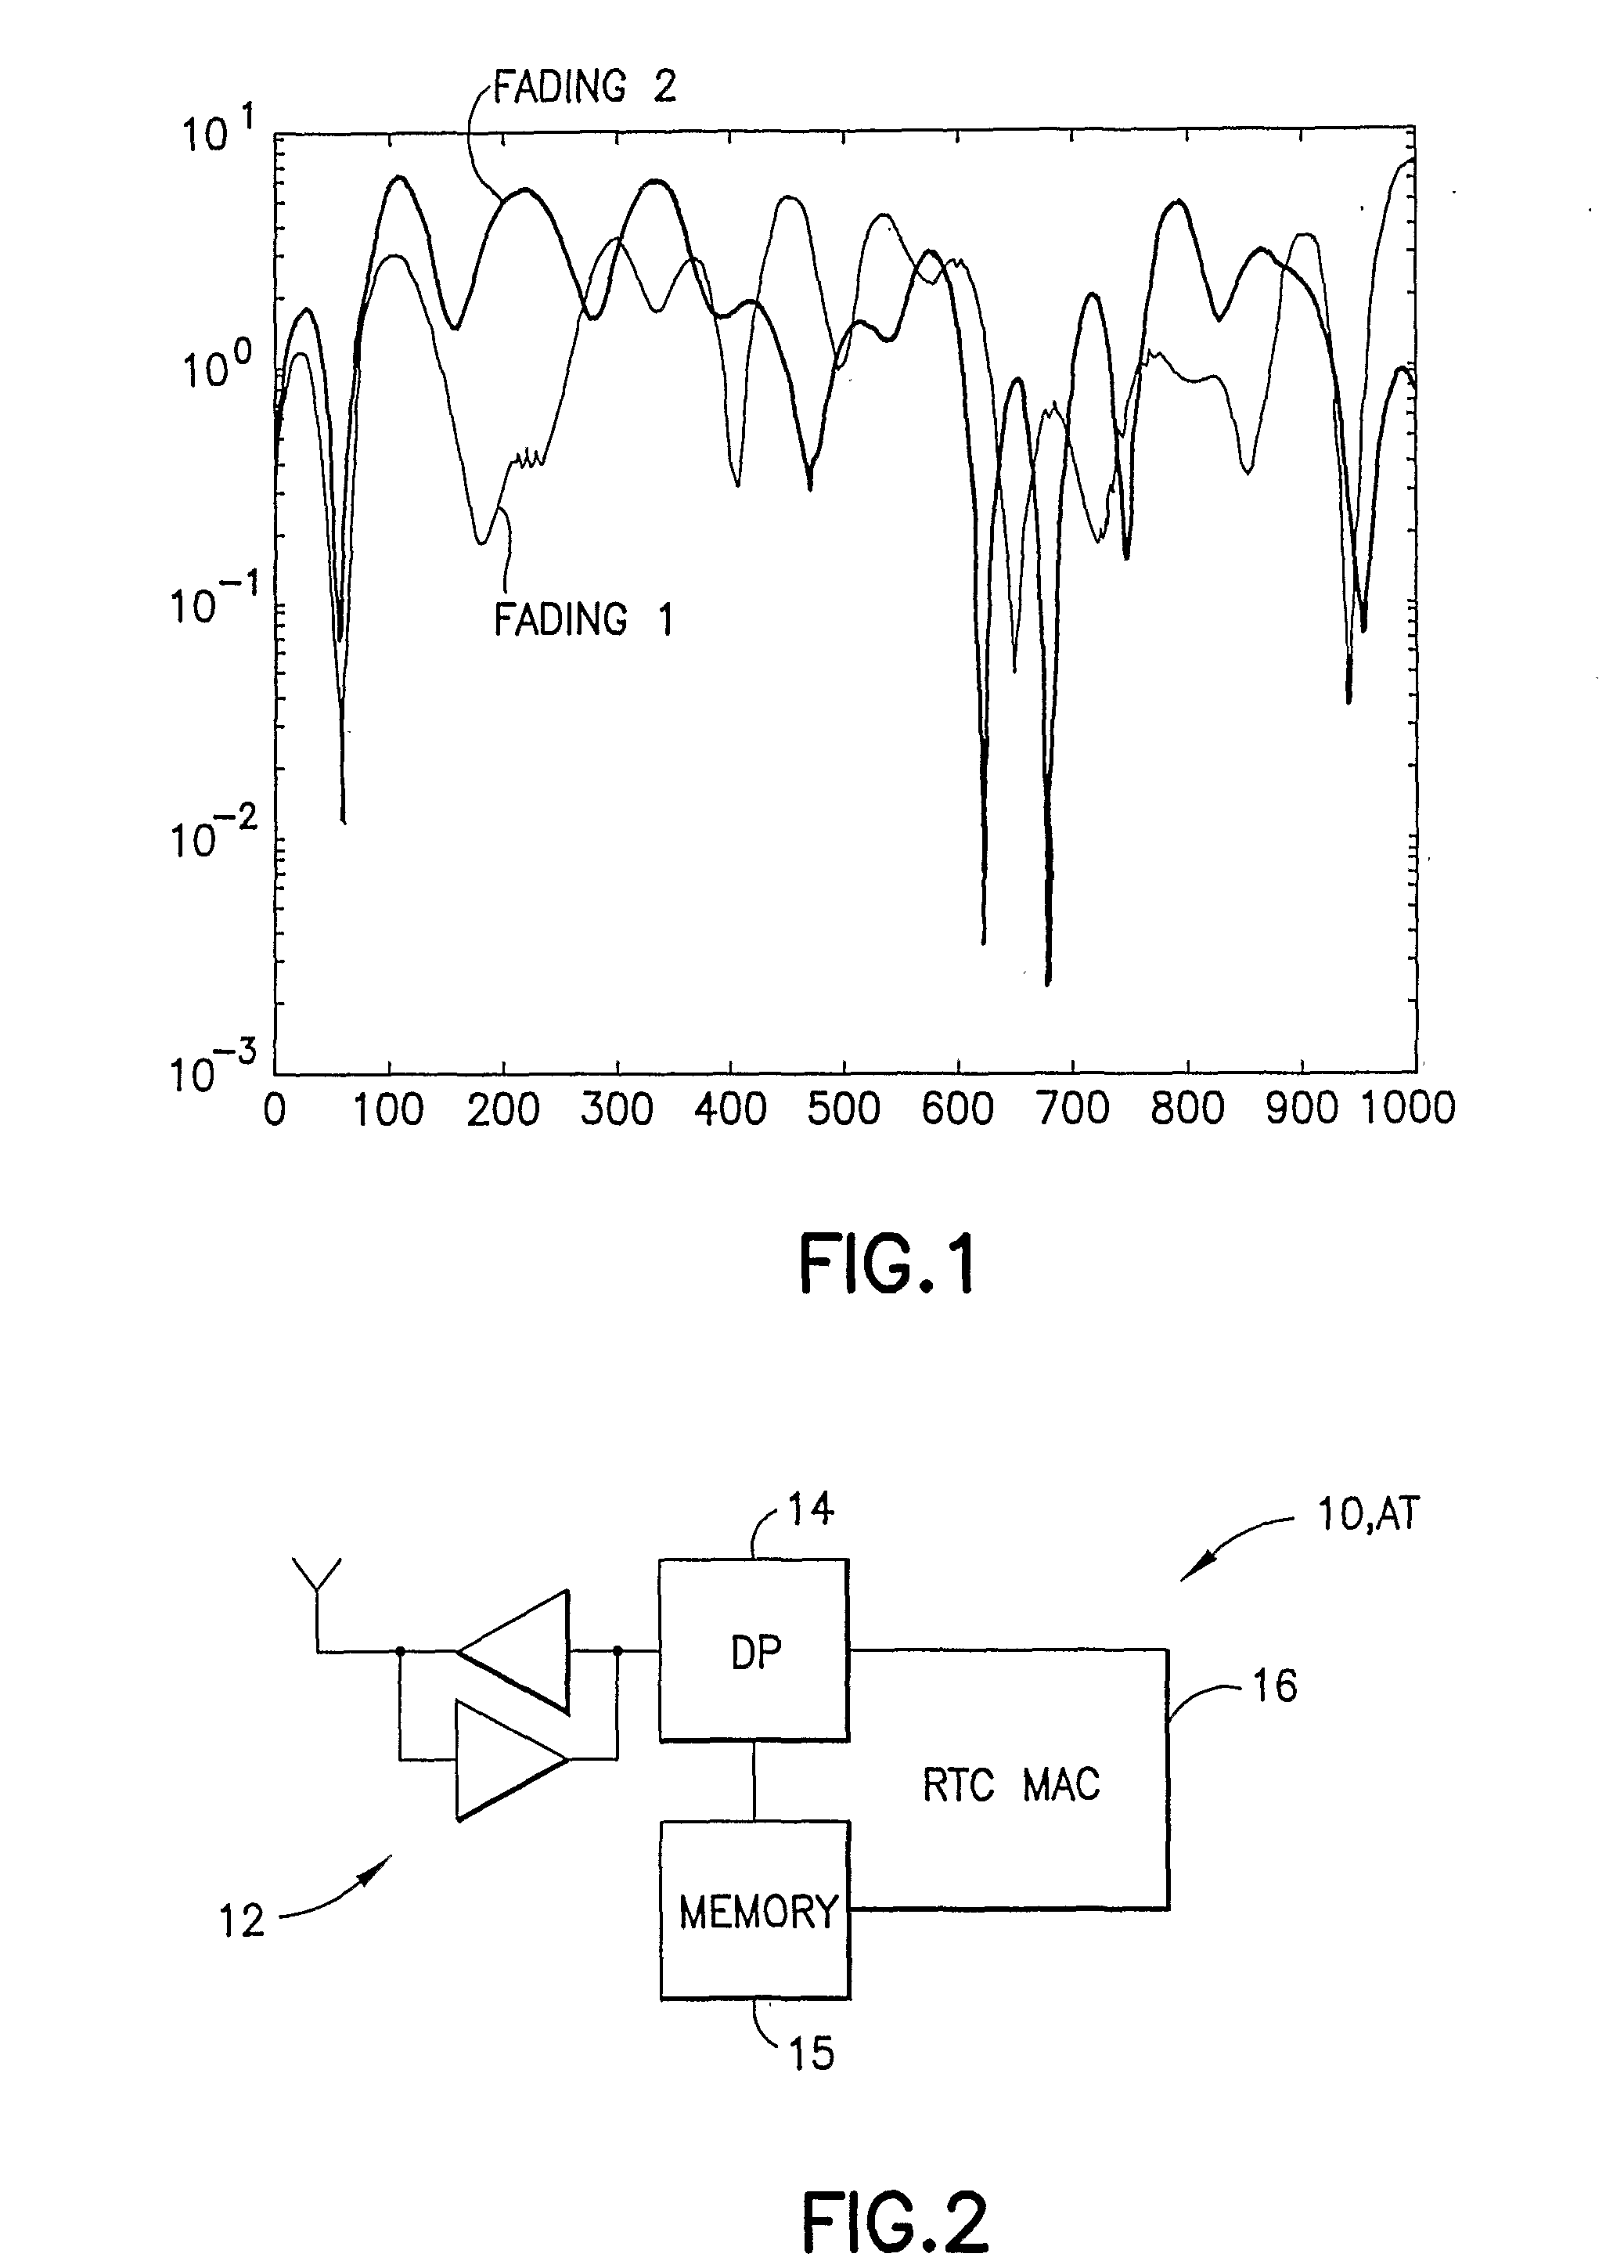 Method, Apparatus and Computer Program Product to Provide Enhanced Reverse Link Medium Access Control in a Multi-Carrier Wireless Communications System